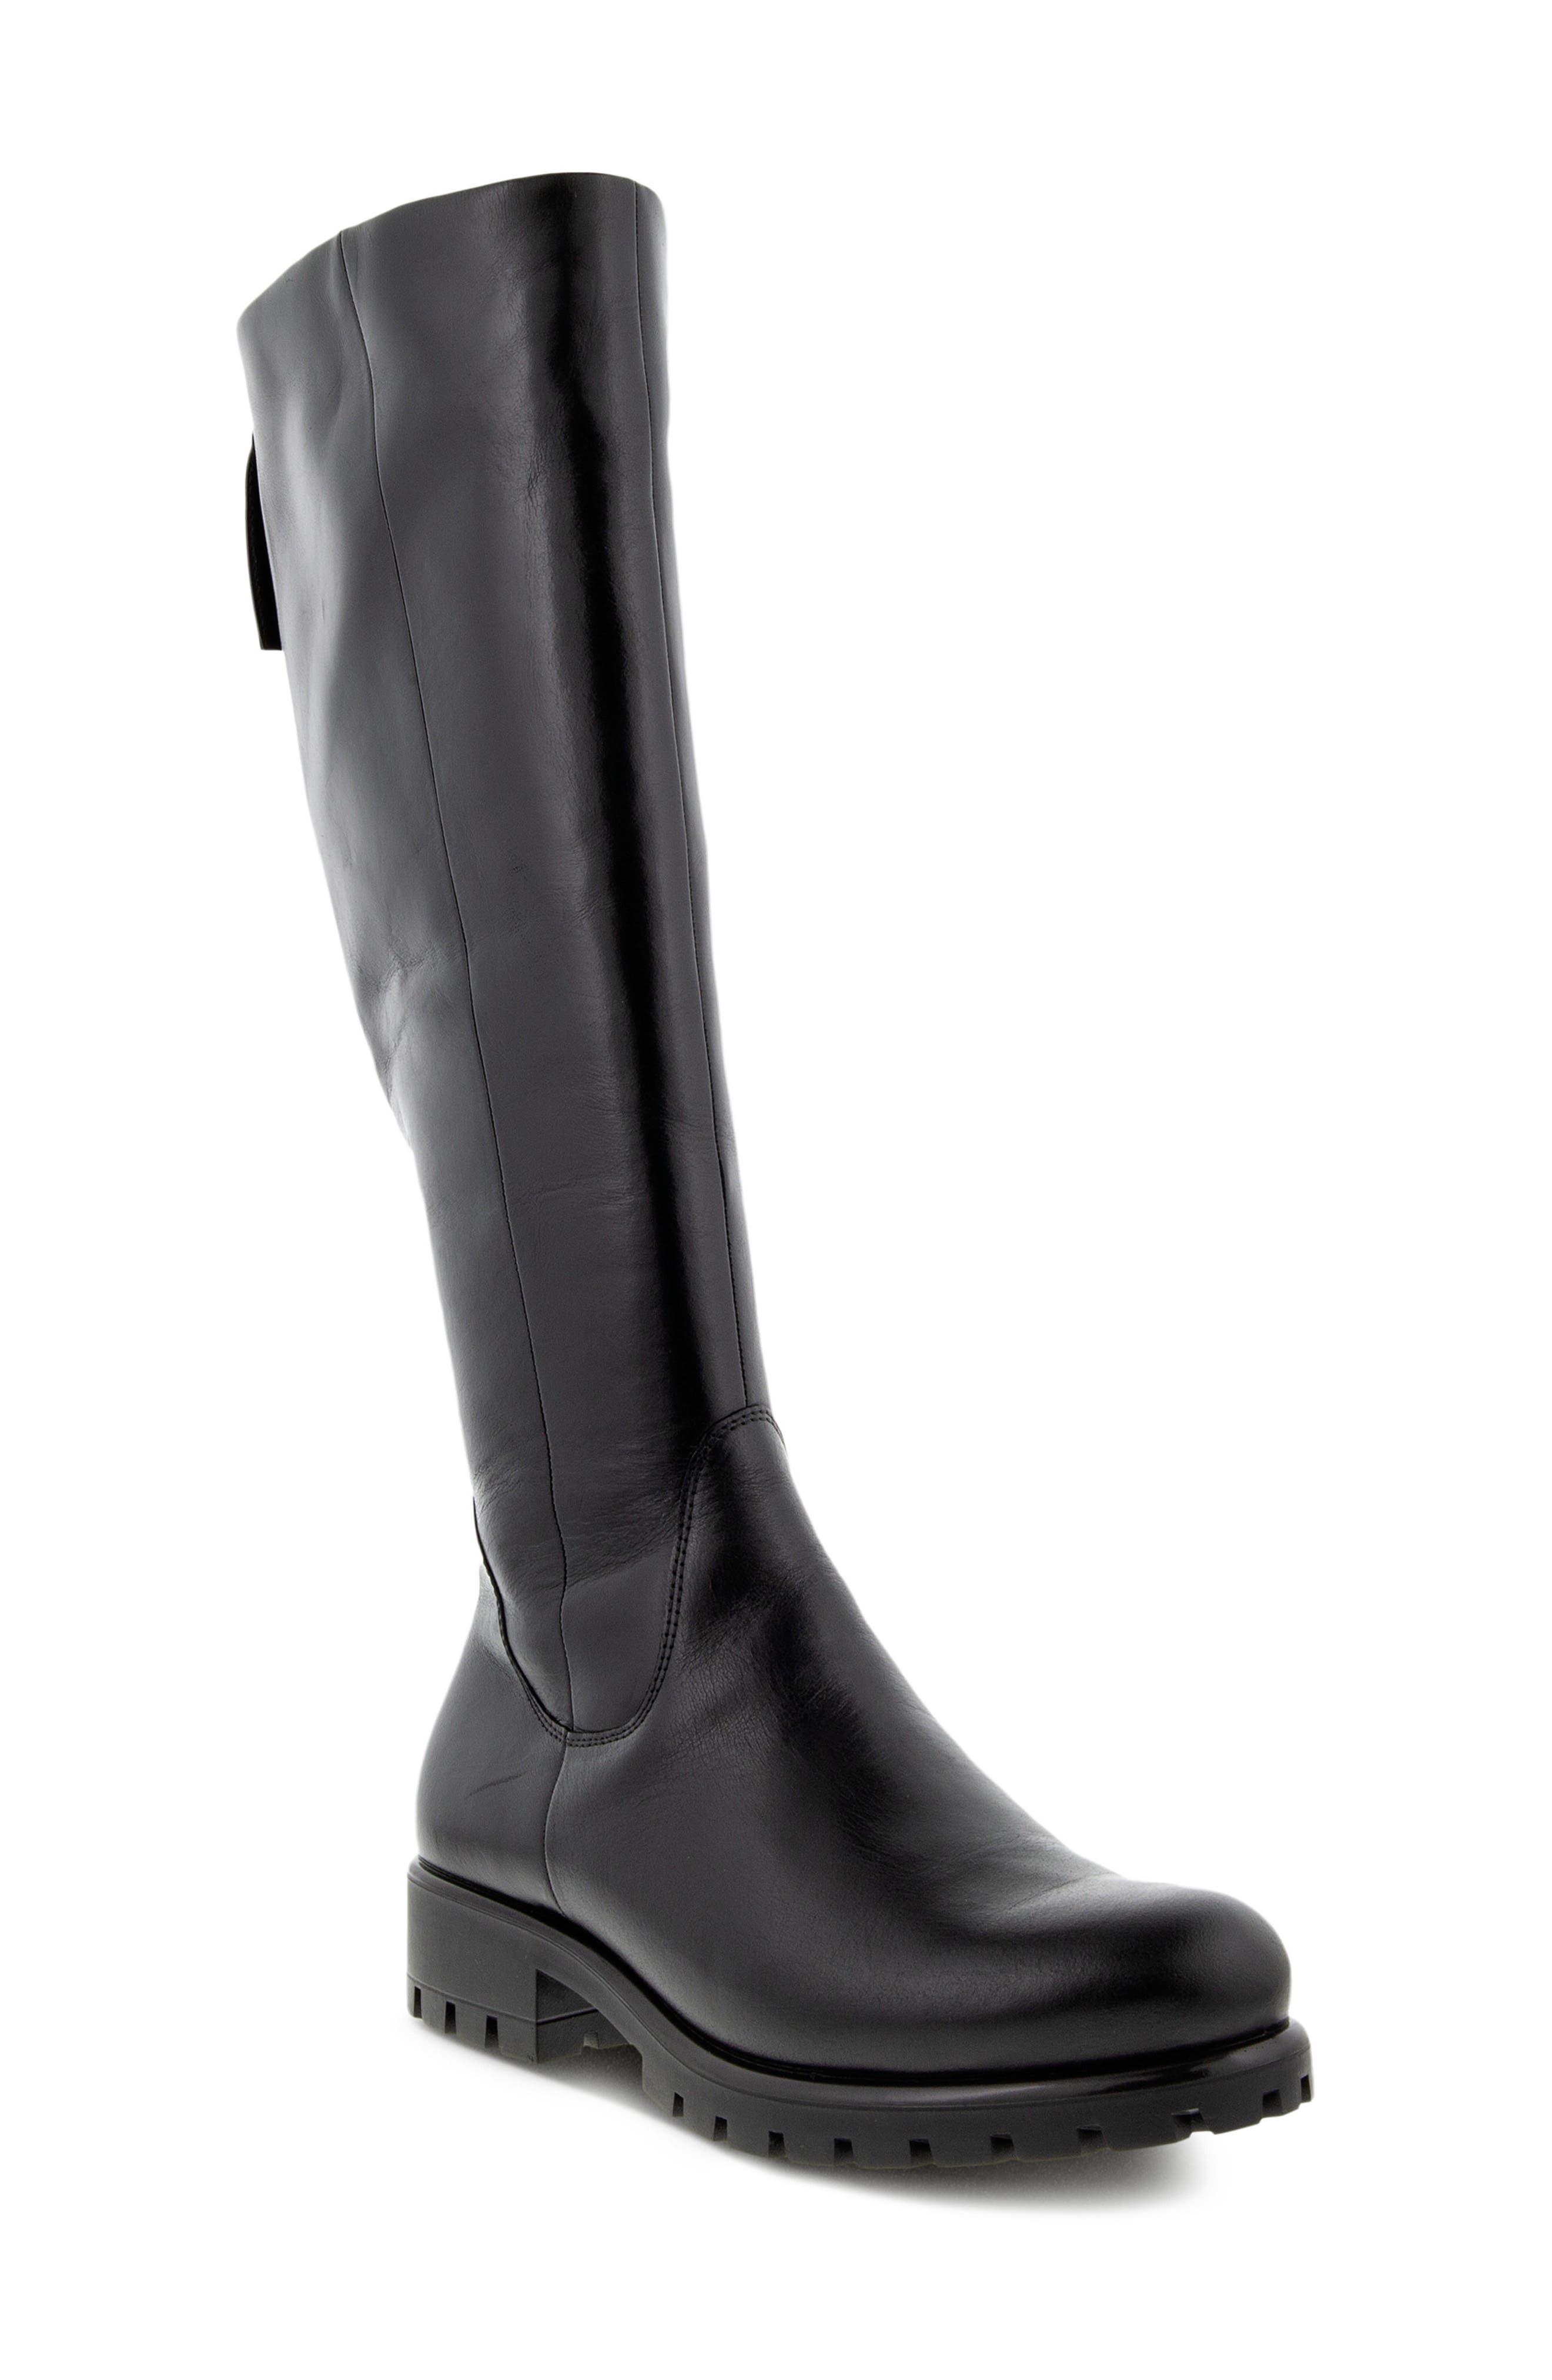 UPC 194890322394 product image for ECCO Modtray Knee High Boot in Black at Nordstrom, Size 8-8.5Us | upcitemdb.com